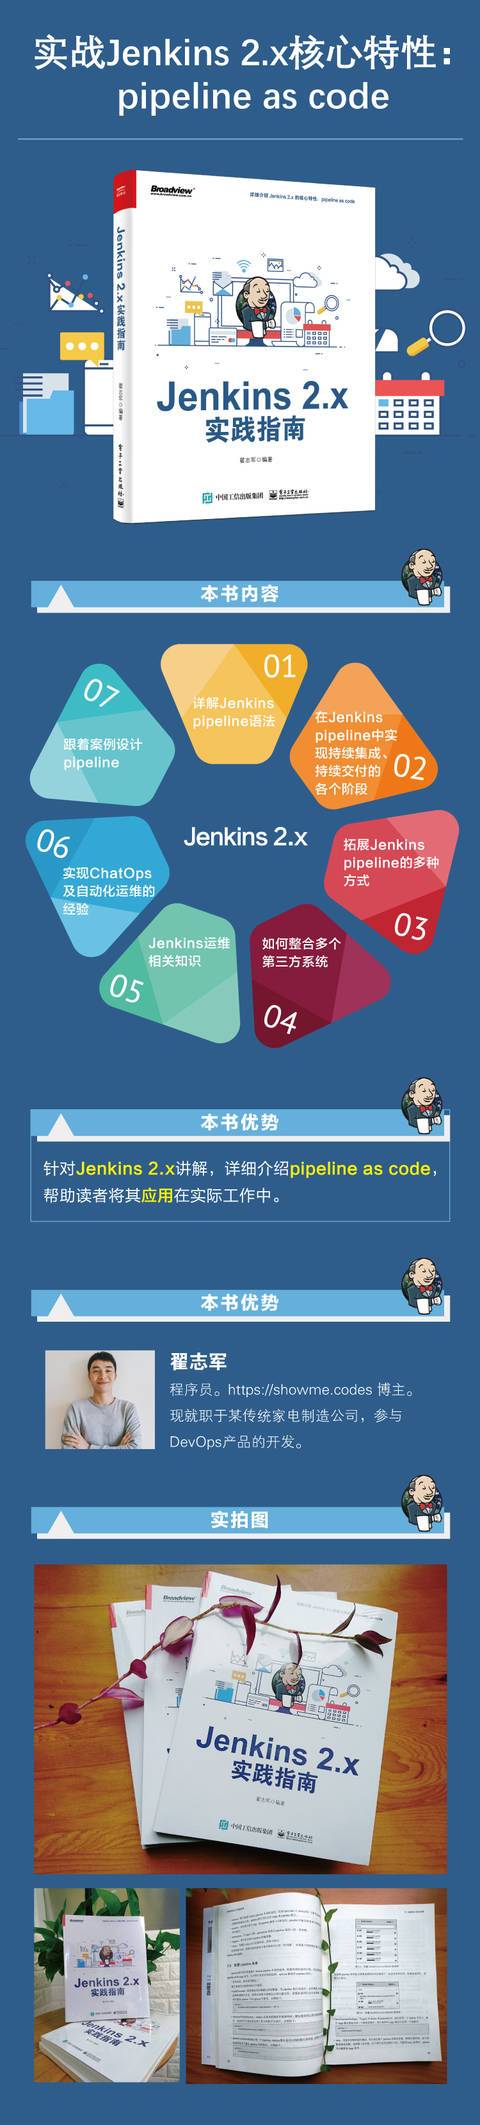 wechat/images/articles/2019/05/2019-05-13-jenkins-book-gift/book-introduce.jpeg